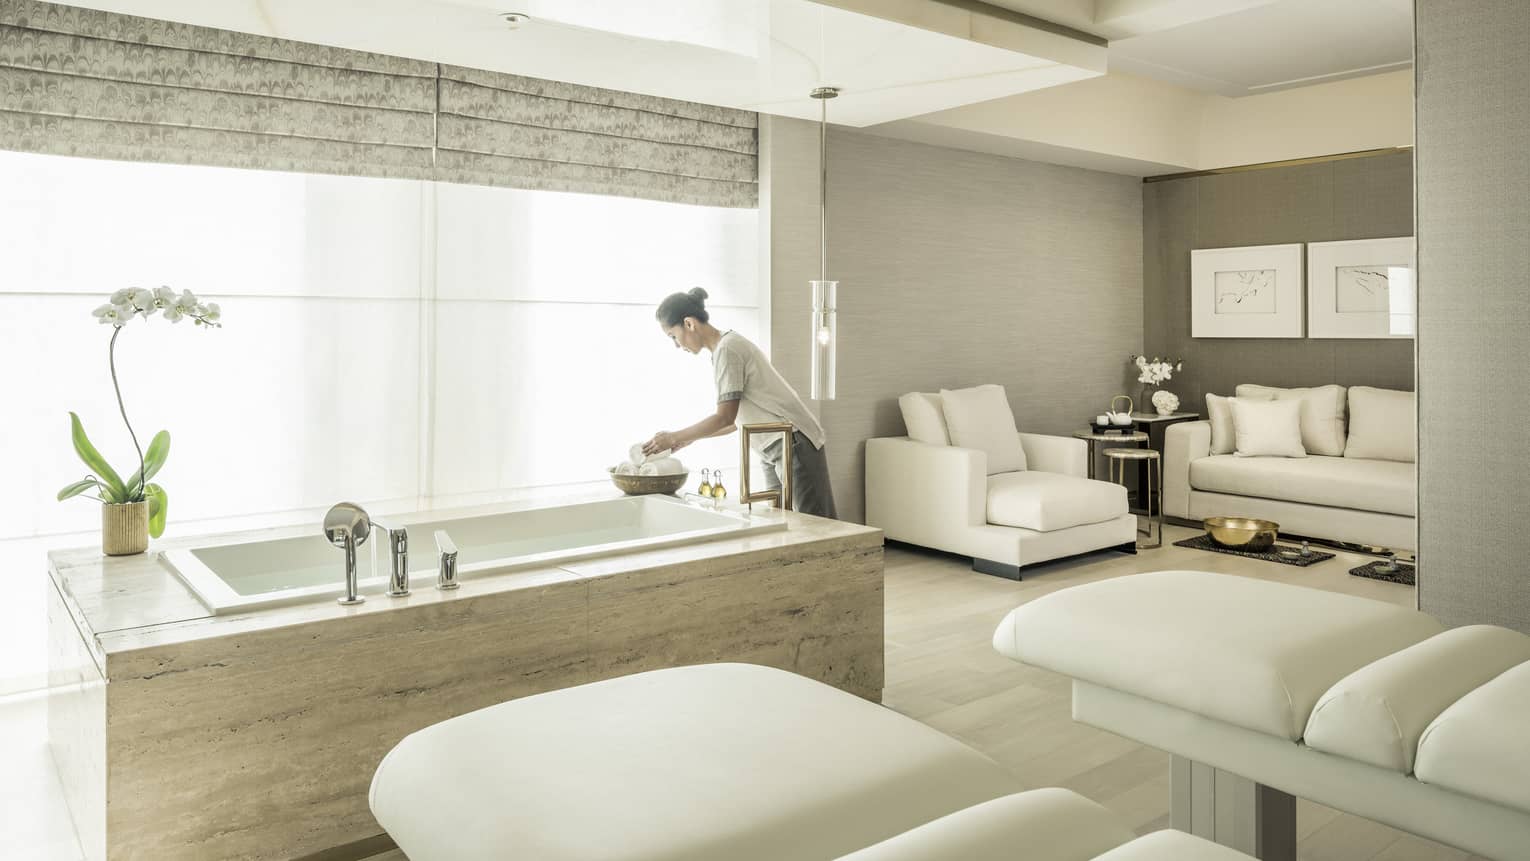 A spa attendant arranges some products in the spa suite, with two massage beds and a soaking tub in front